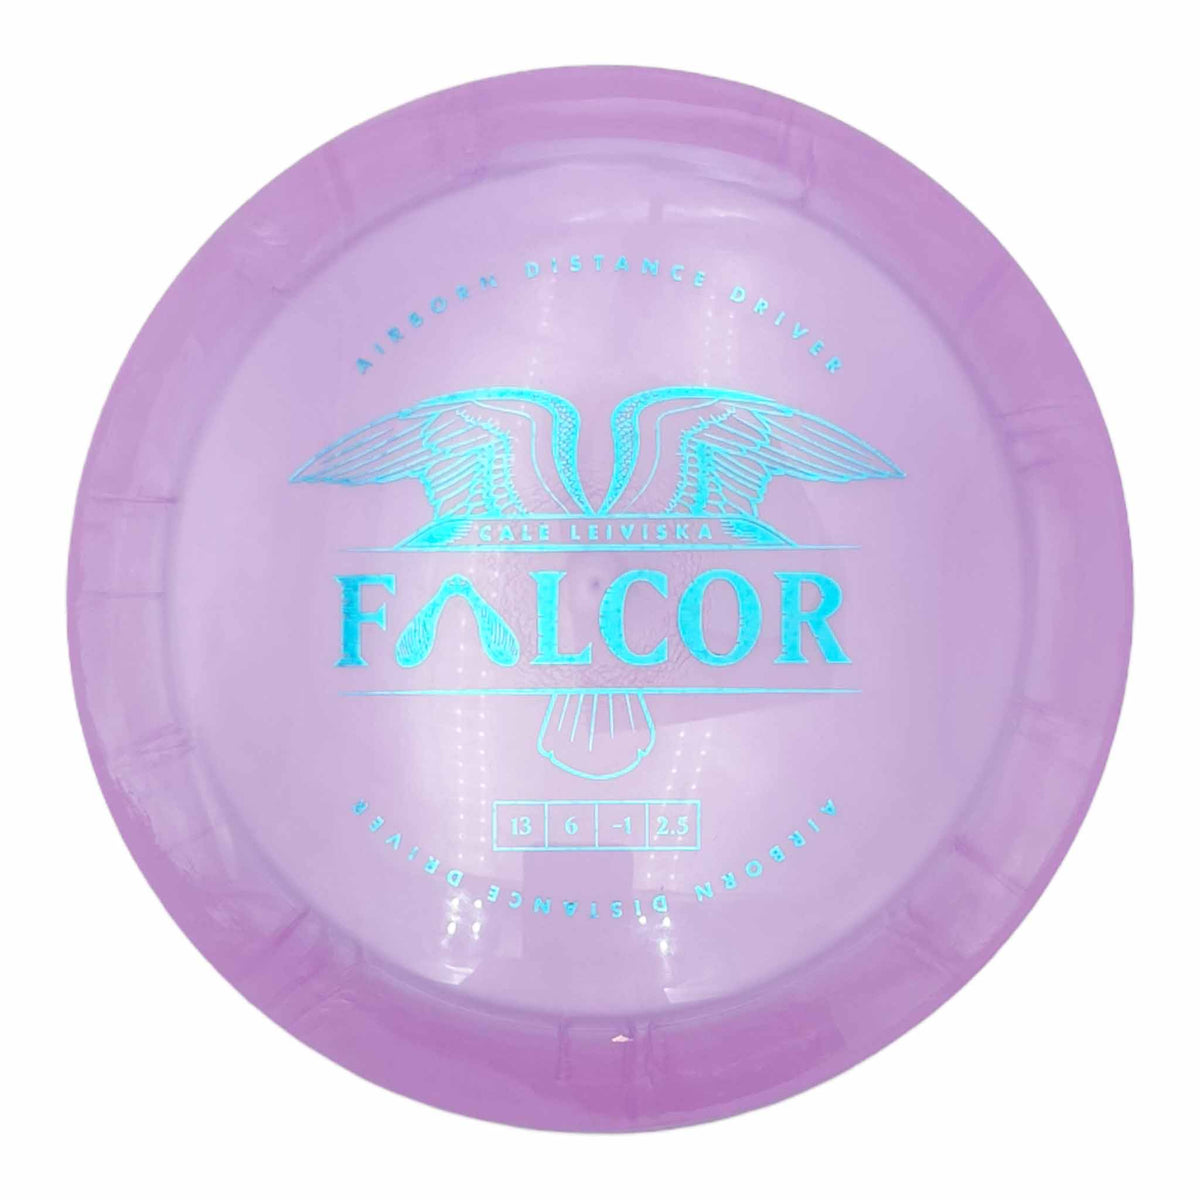 Prodigy 500 Airborn Falcor distance driver - Pink / Blue